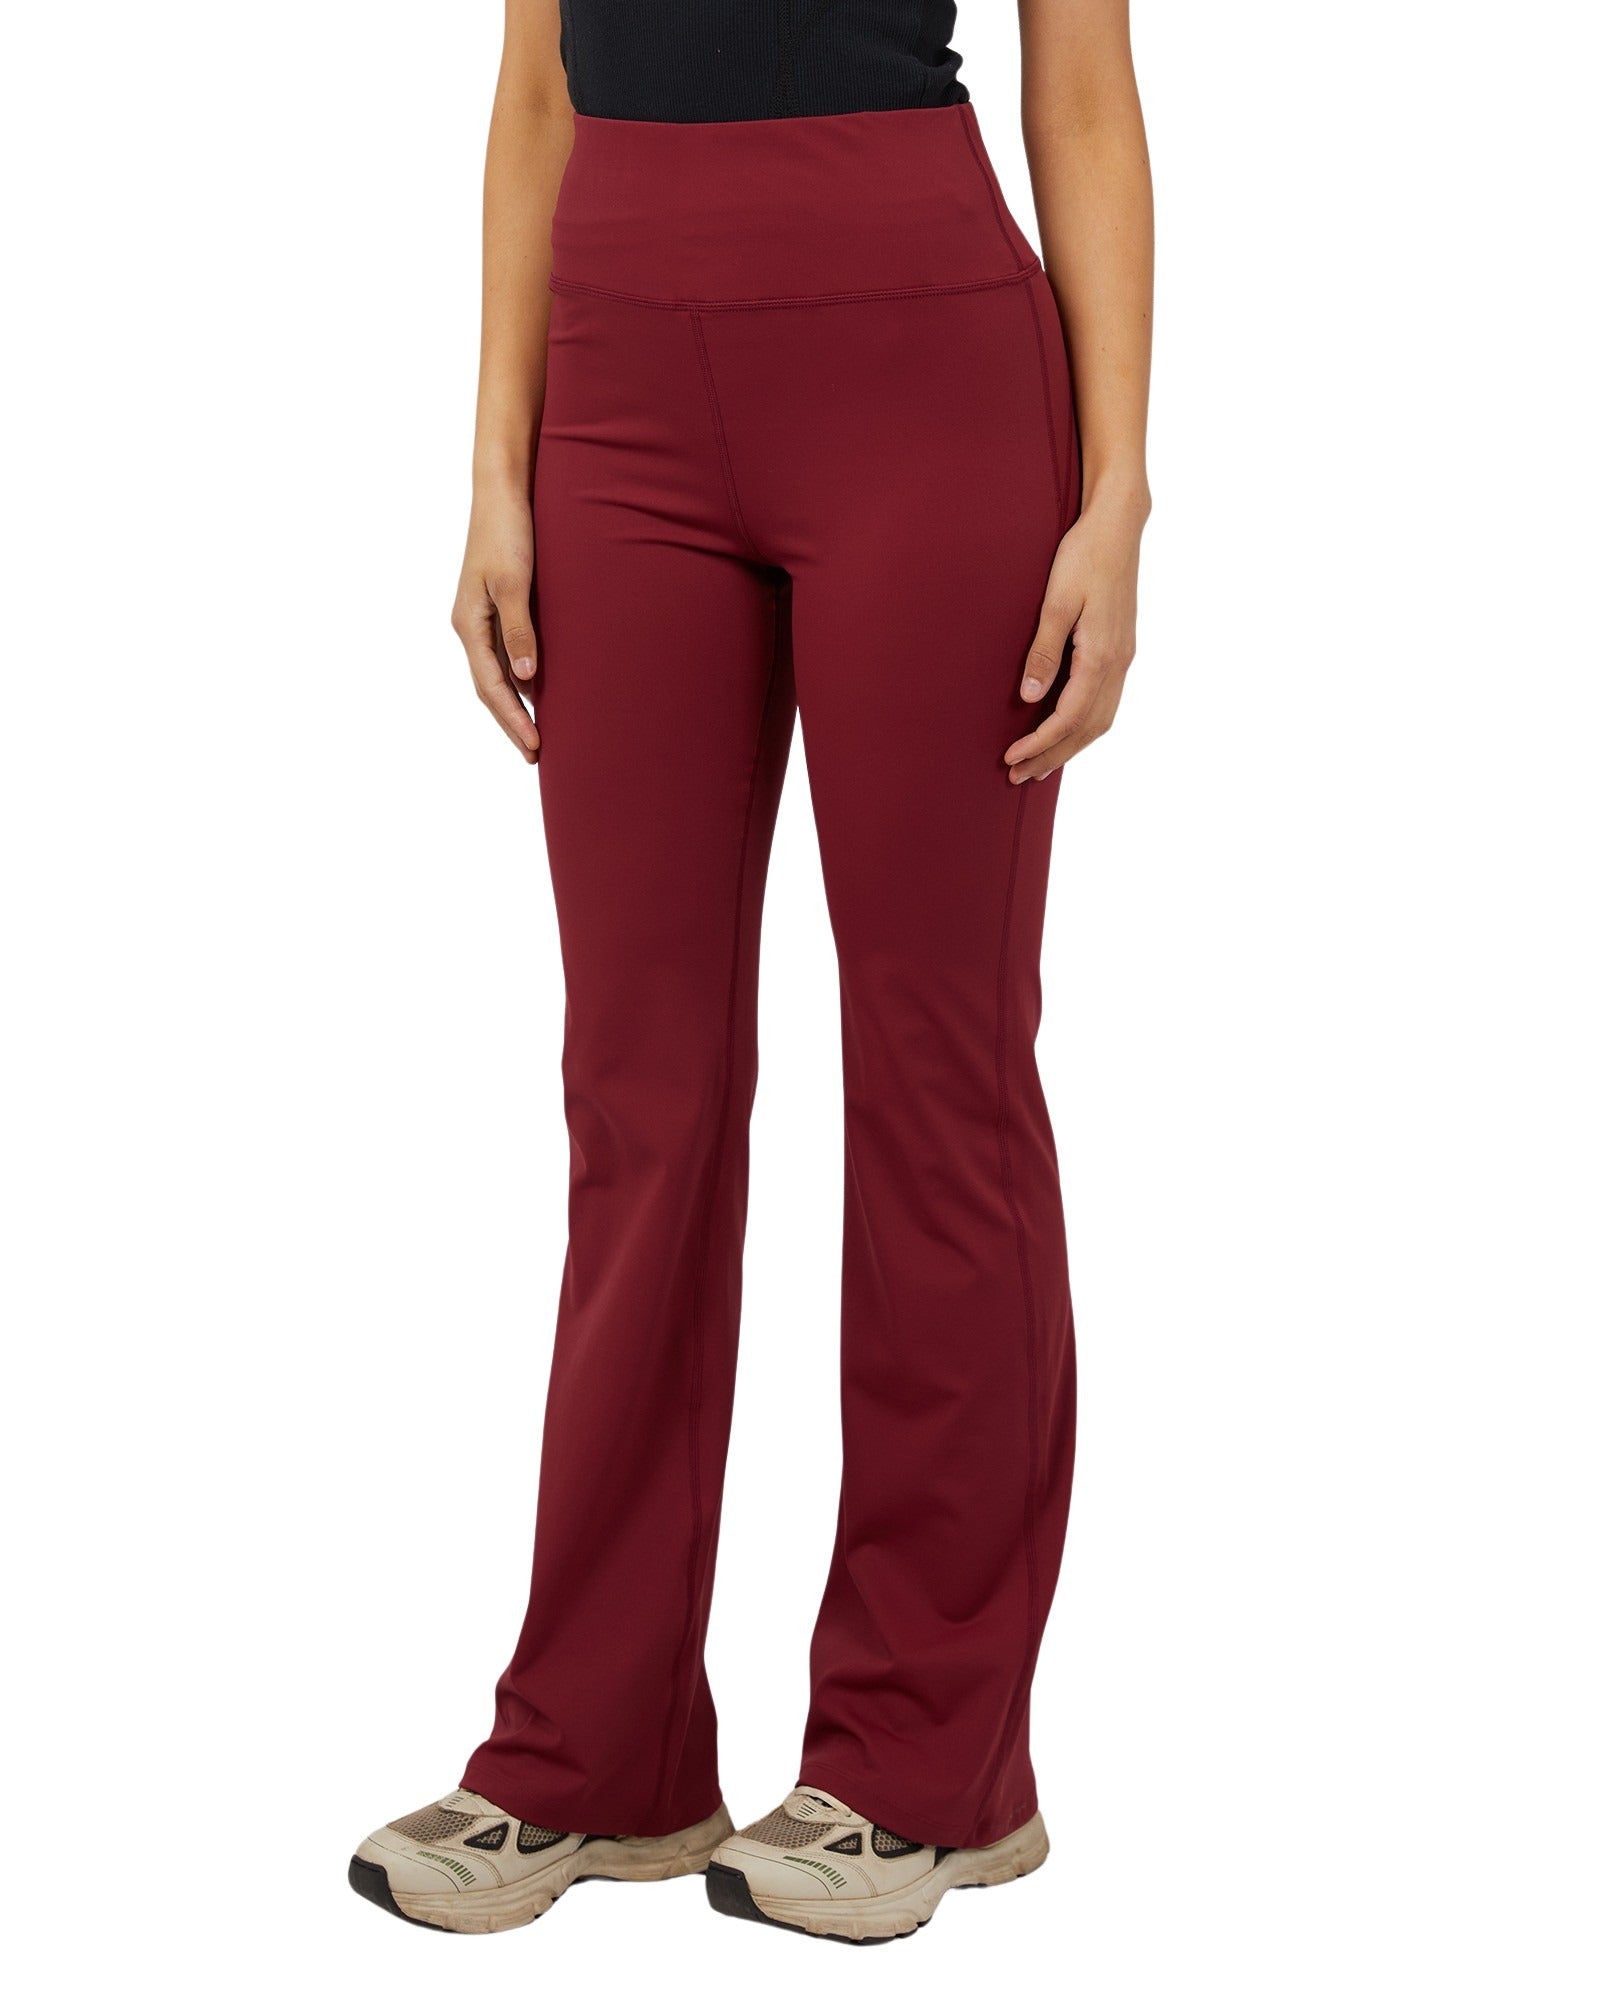 All About Eve - AAE Active Flare Legging - Port